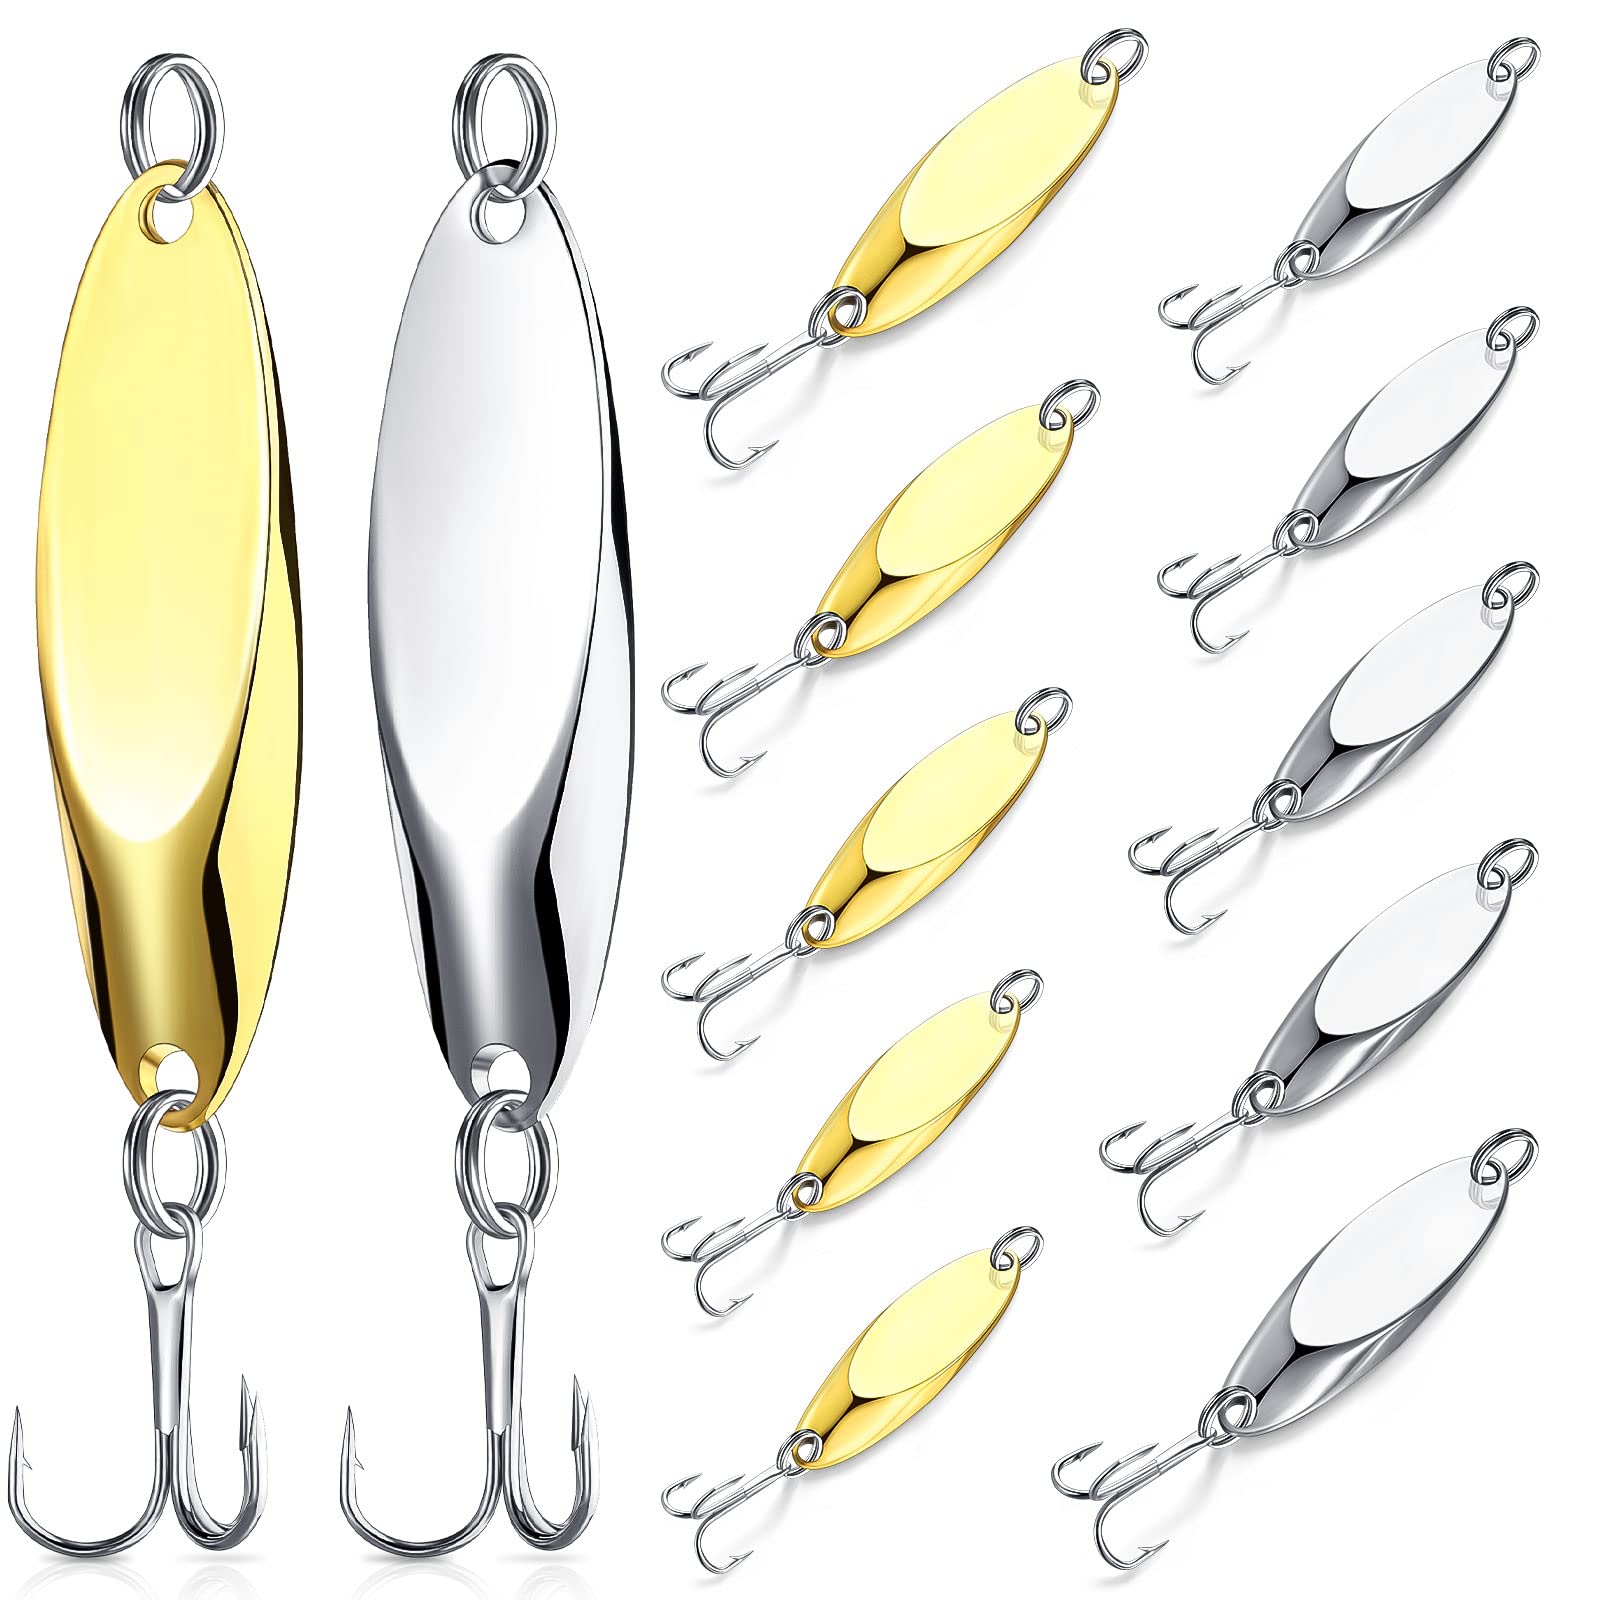 30 Pieces Fishing Spoons Lures, Treble Hooks Fishing Spoons Hard Metal Spoon  Lures Spoons for Huge Distance Cast Saltwater Freshwater Fishing in 1/5 oz  1/4 oz 3/8 oz 1/2 oz 3/4 oz Gold,Silver